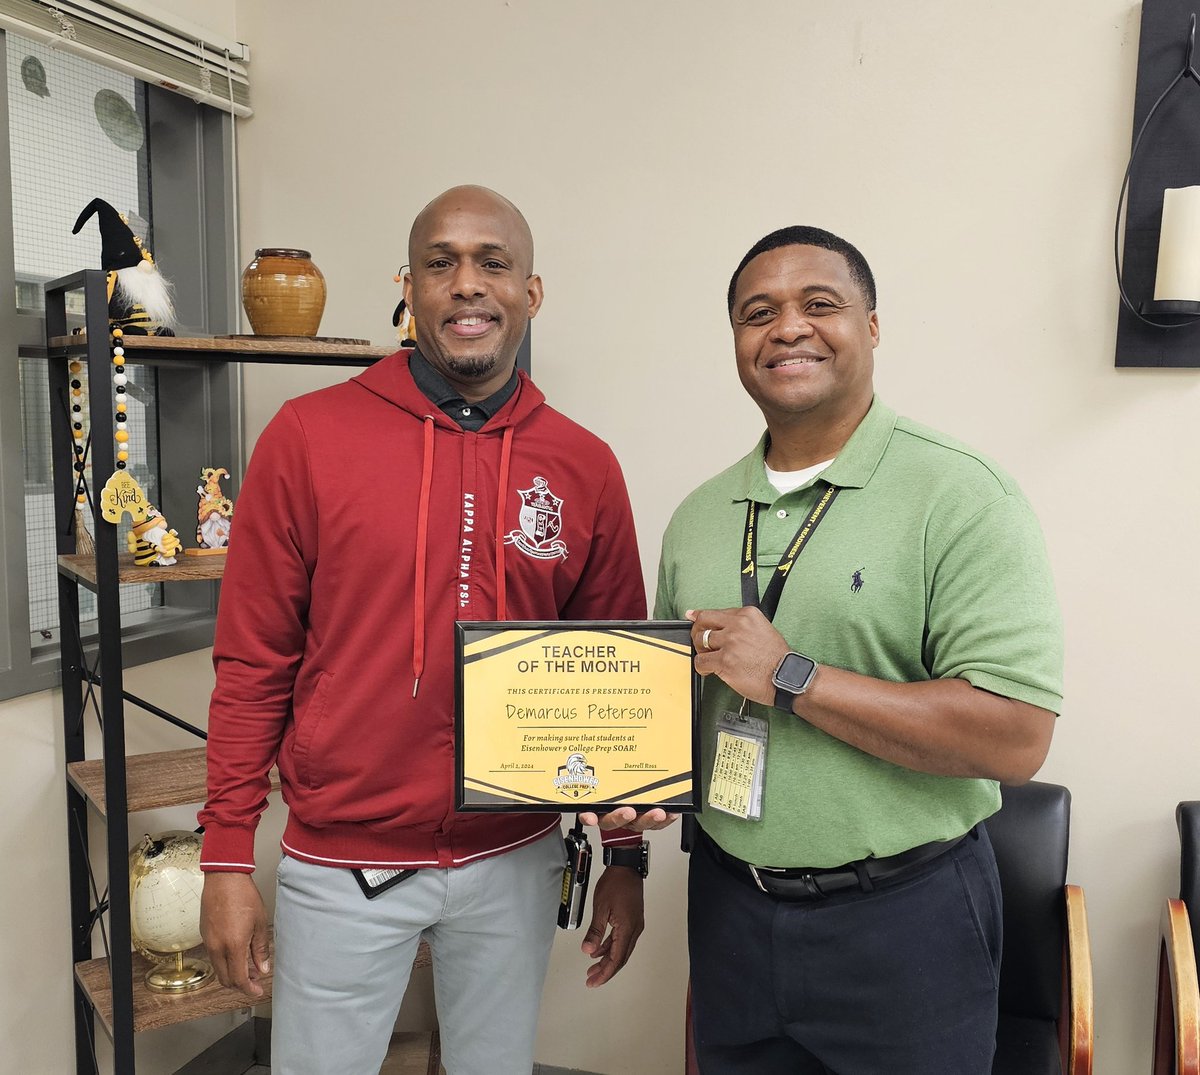 Congratulations ro our Teacher of the Month Mr. Demarcus Peterson! He is an amazing resource for students and staff, always willing to lend a helping hand. #swoopswoop @Darrell88Ross @AldineISD